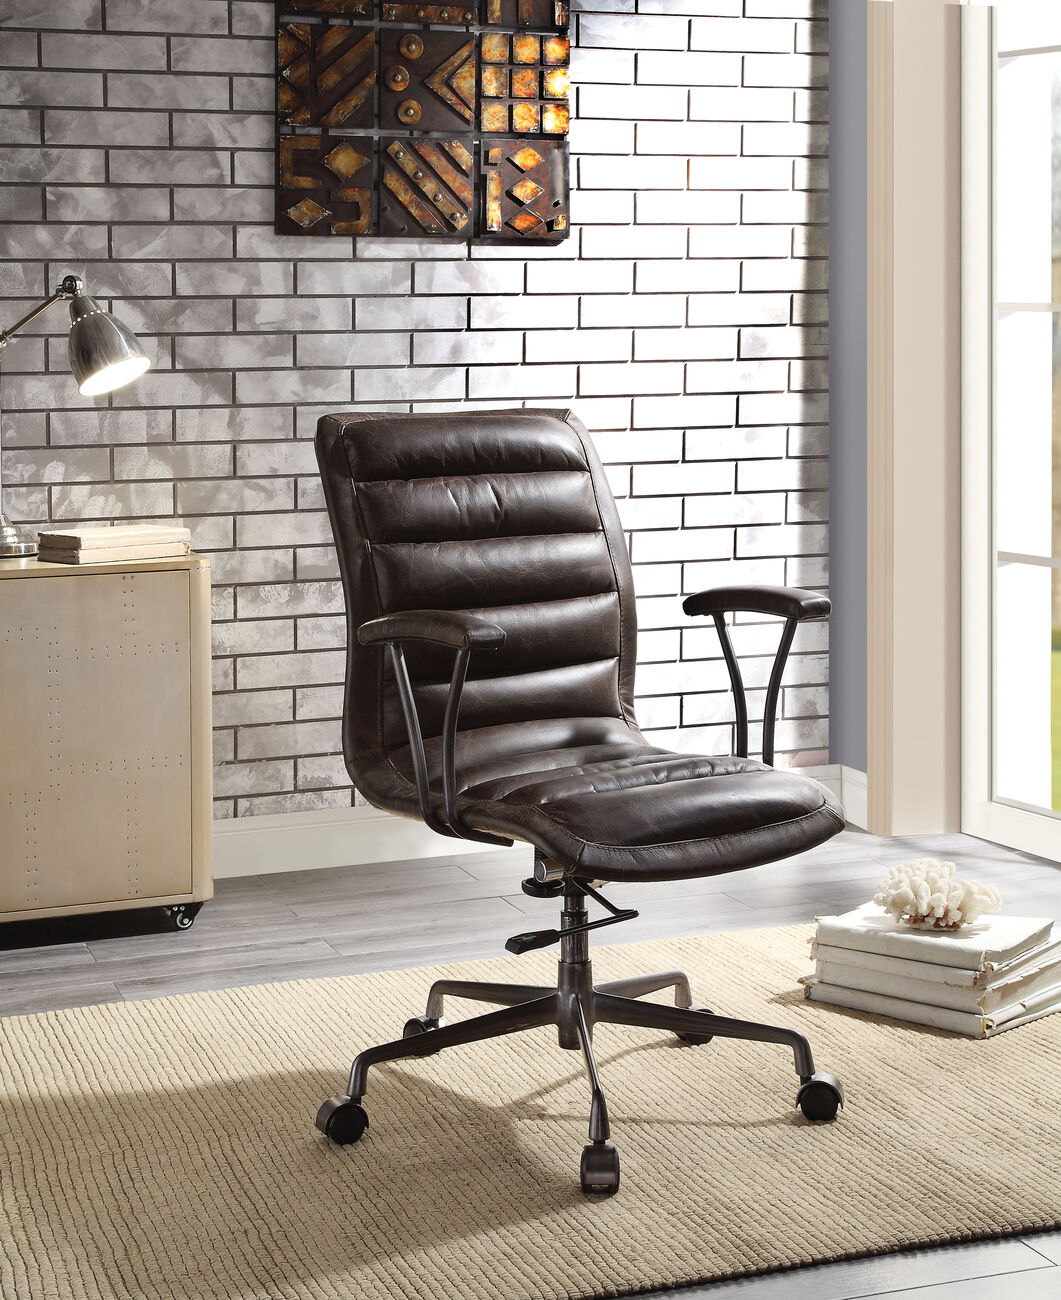 Tufted Leatherette Office Chair with Adjustable Metal Base and Padded Armrest, Brown and Gray